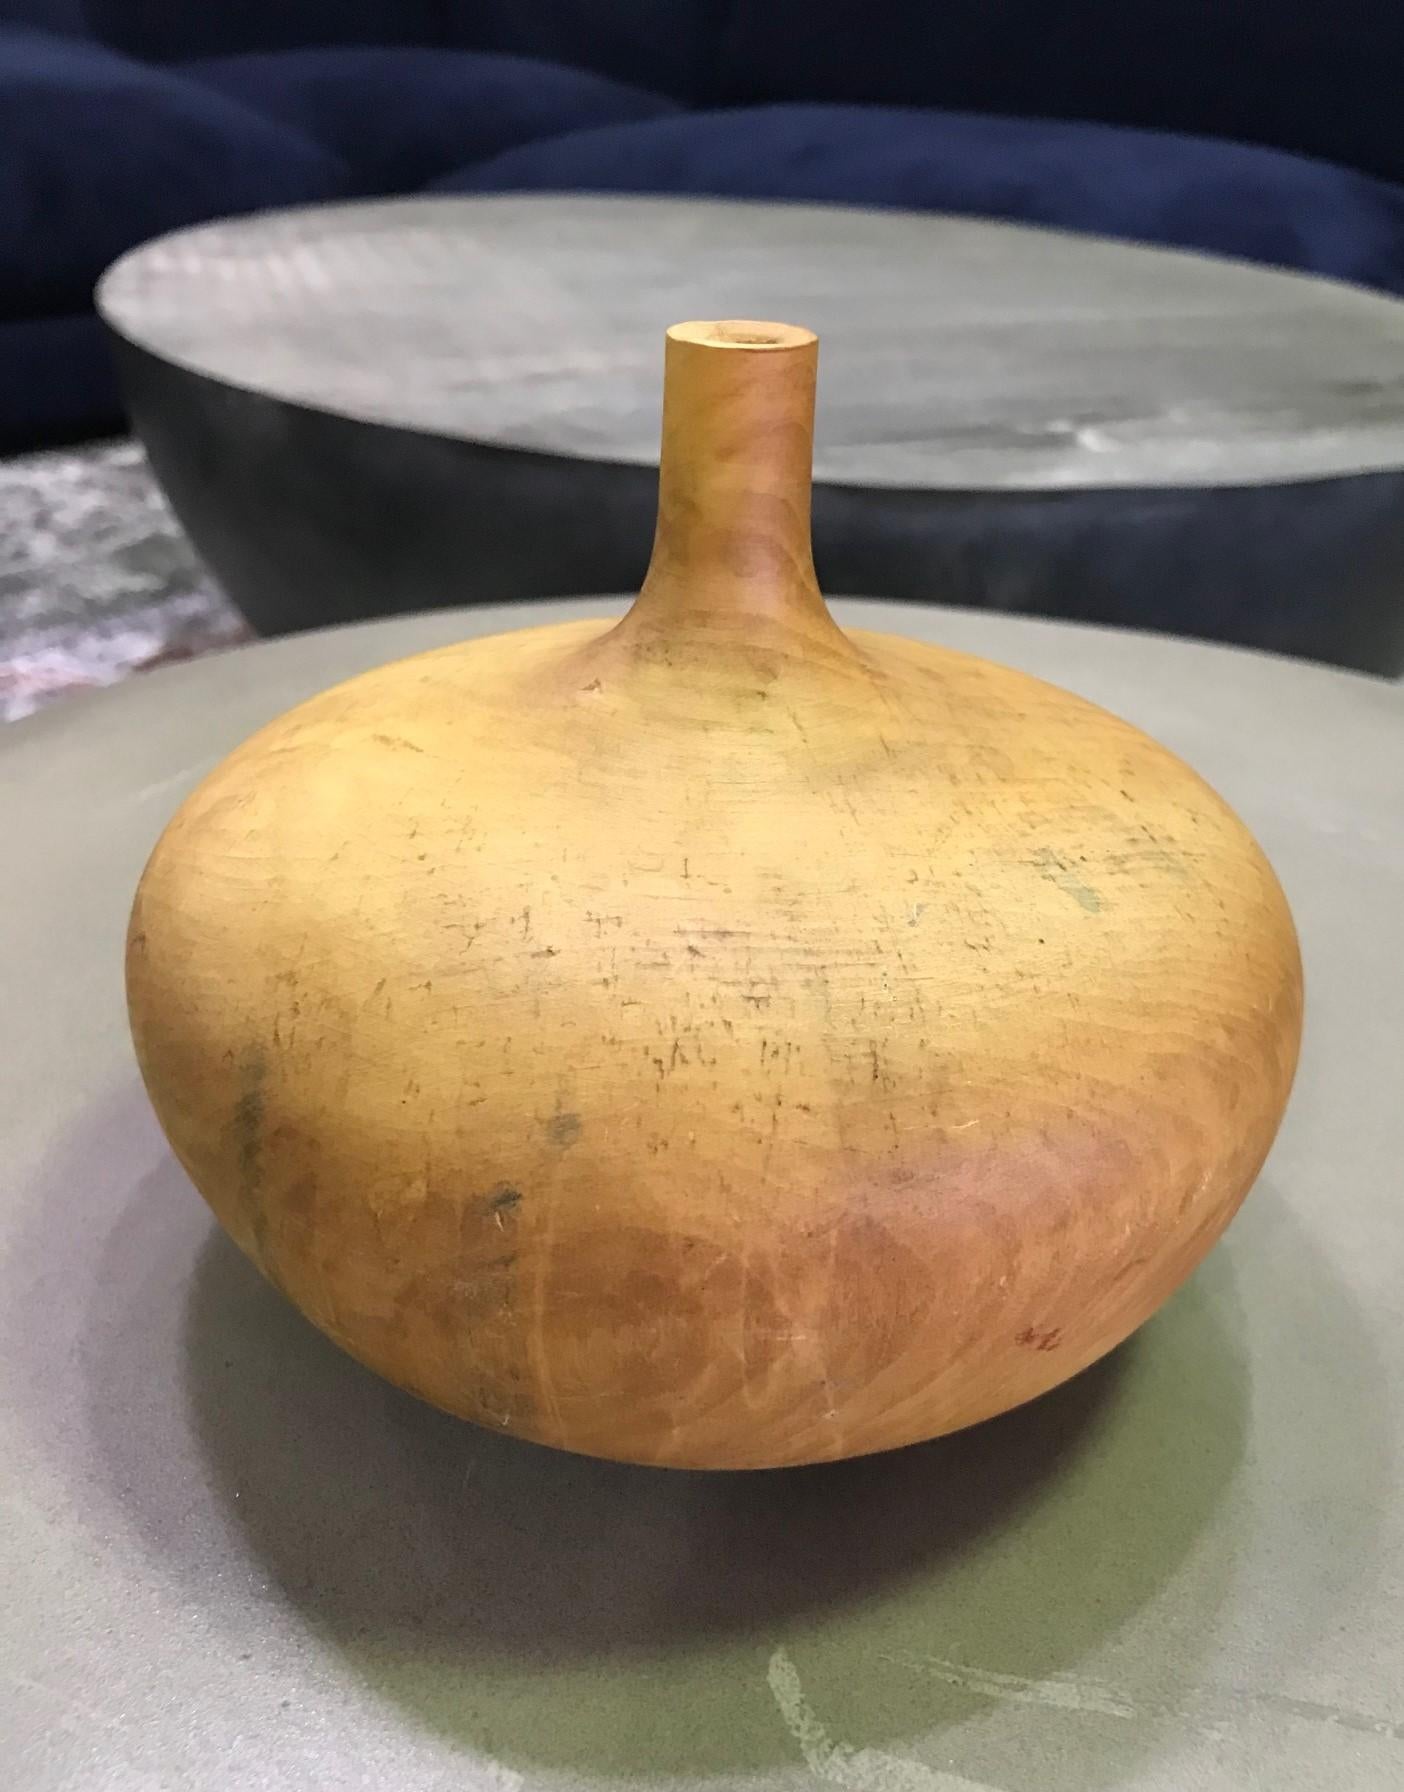 A beautifully executed, handmade, buckeye wood turned vase by Rude Osolnik who is widely regarded, along with Bob Stocksdale, as one of the finest woodturners in American woodturning history. In 1992, he was presented by then Kentucky Governor